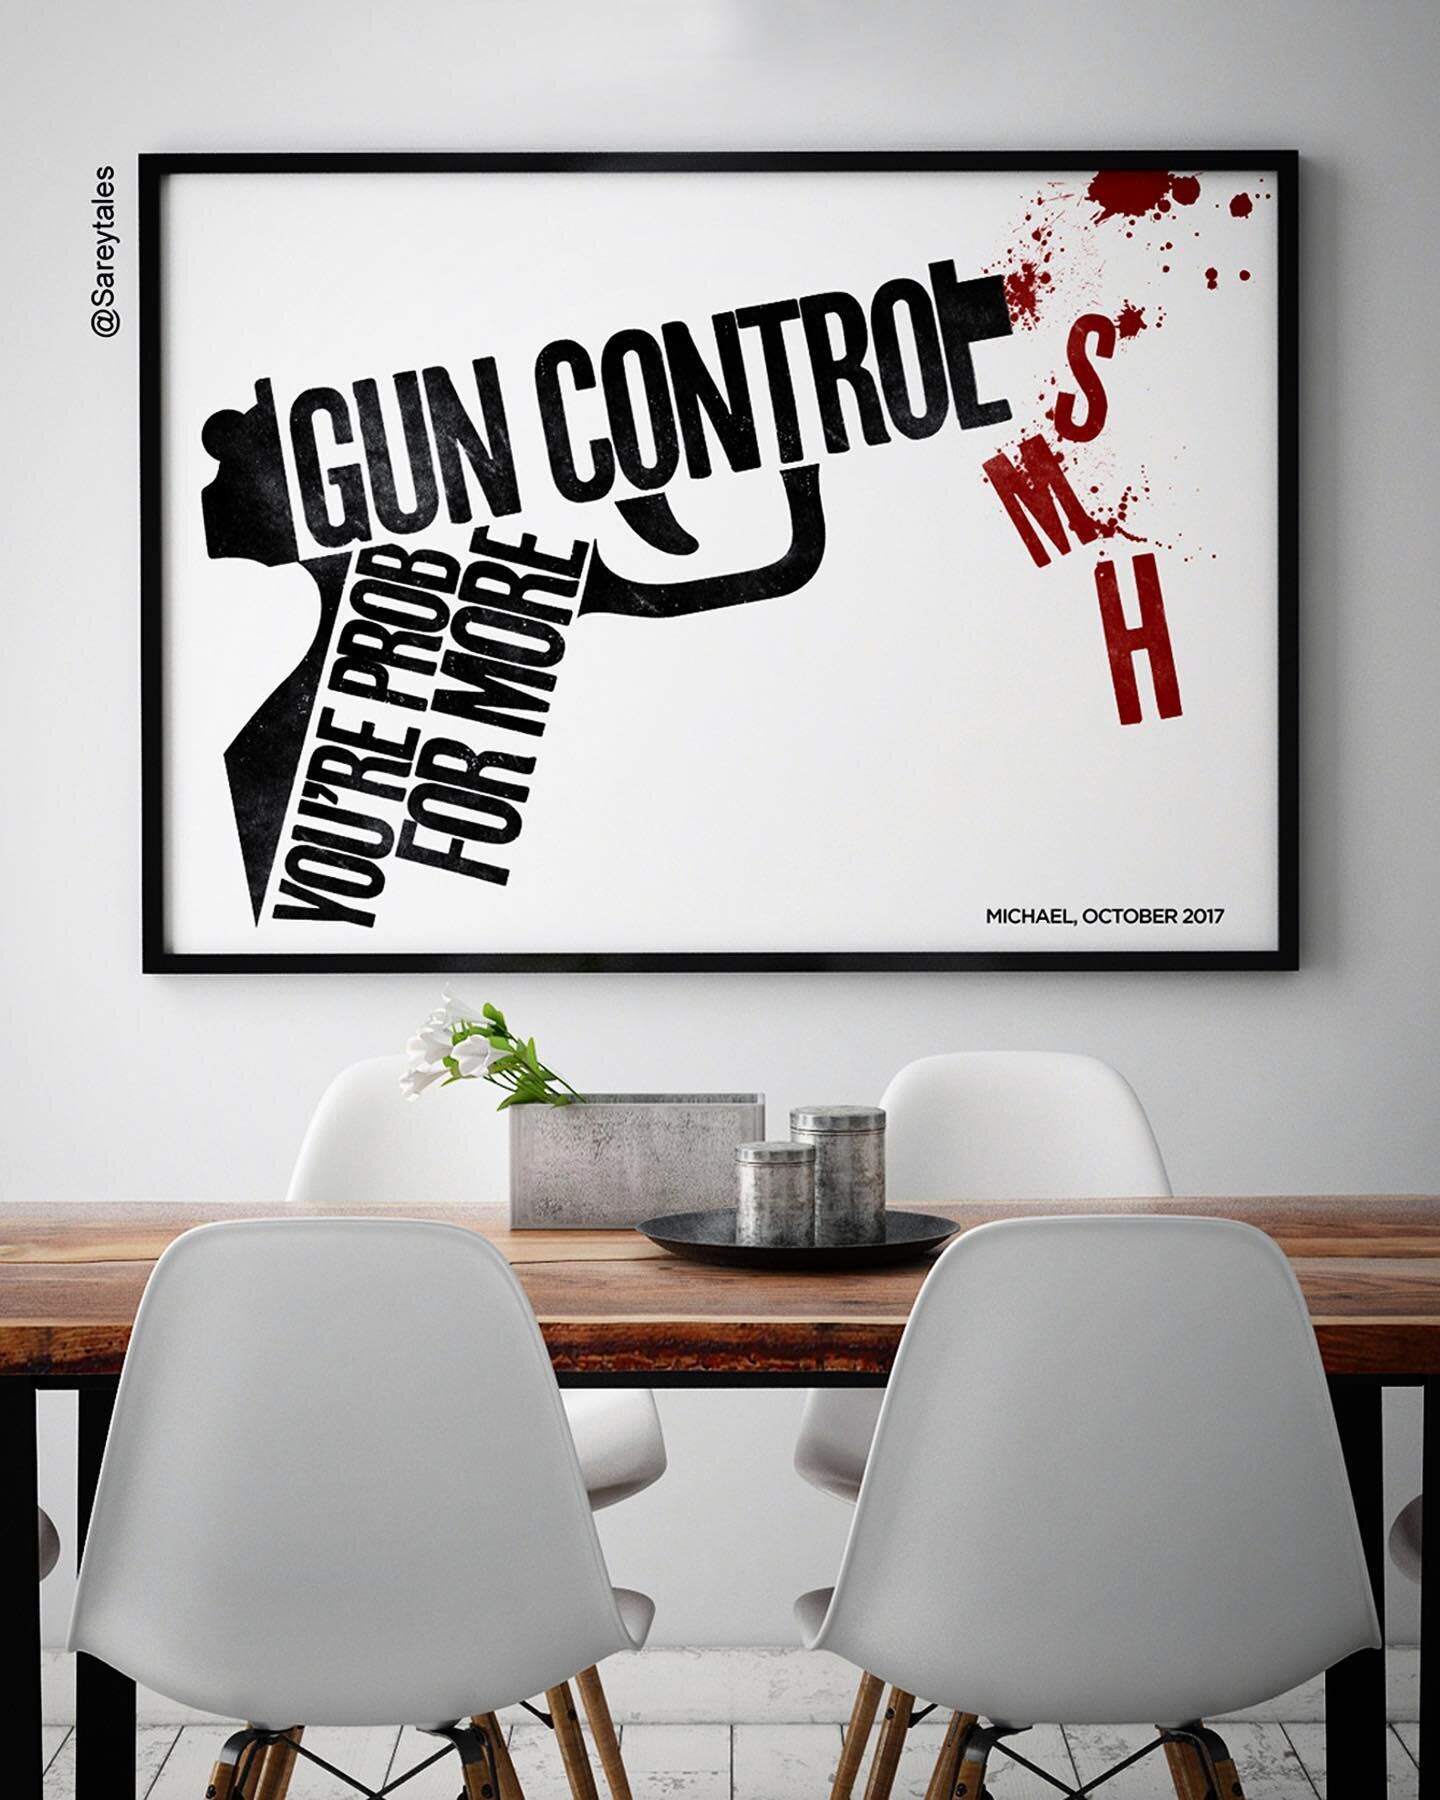 &ldquo;More Control&rdquo; (digital illustration, @sareytales 2018, 20&rdquo;x16&rdquo;)
.
New day, same tragedy. Thought experiment; How about we just keep guns out of the hands of (white) men? Would that be sexist, racist, or both?